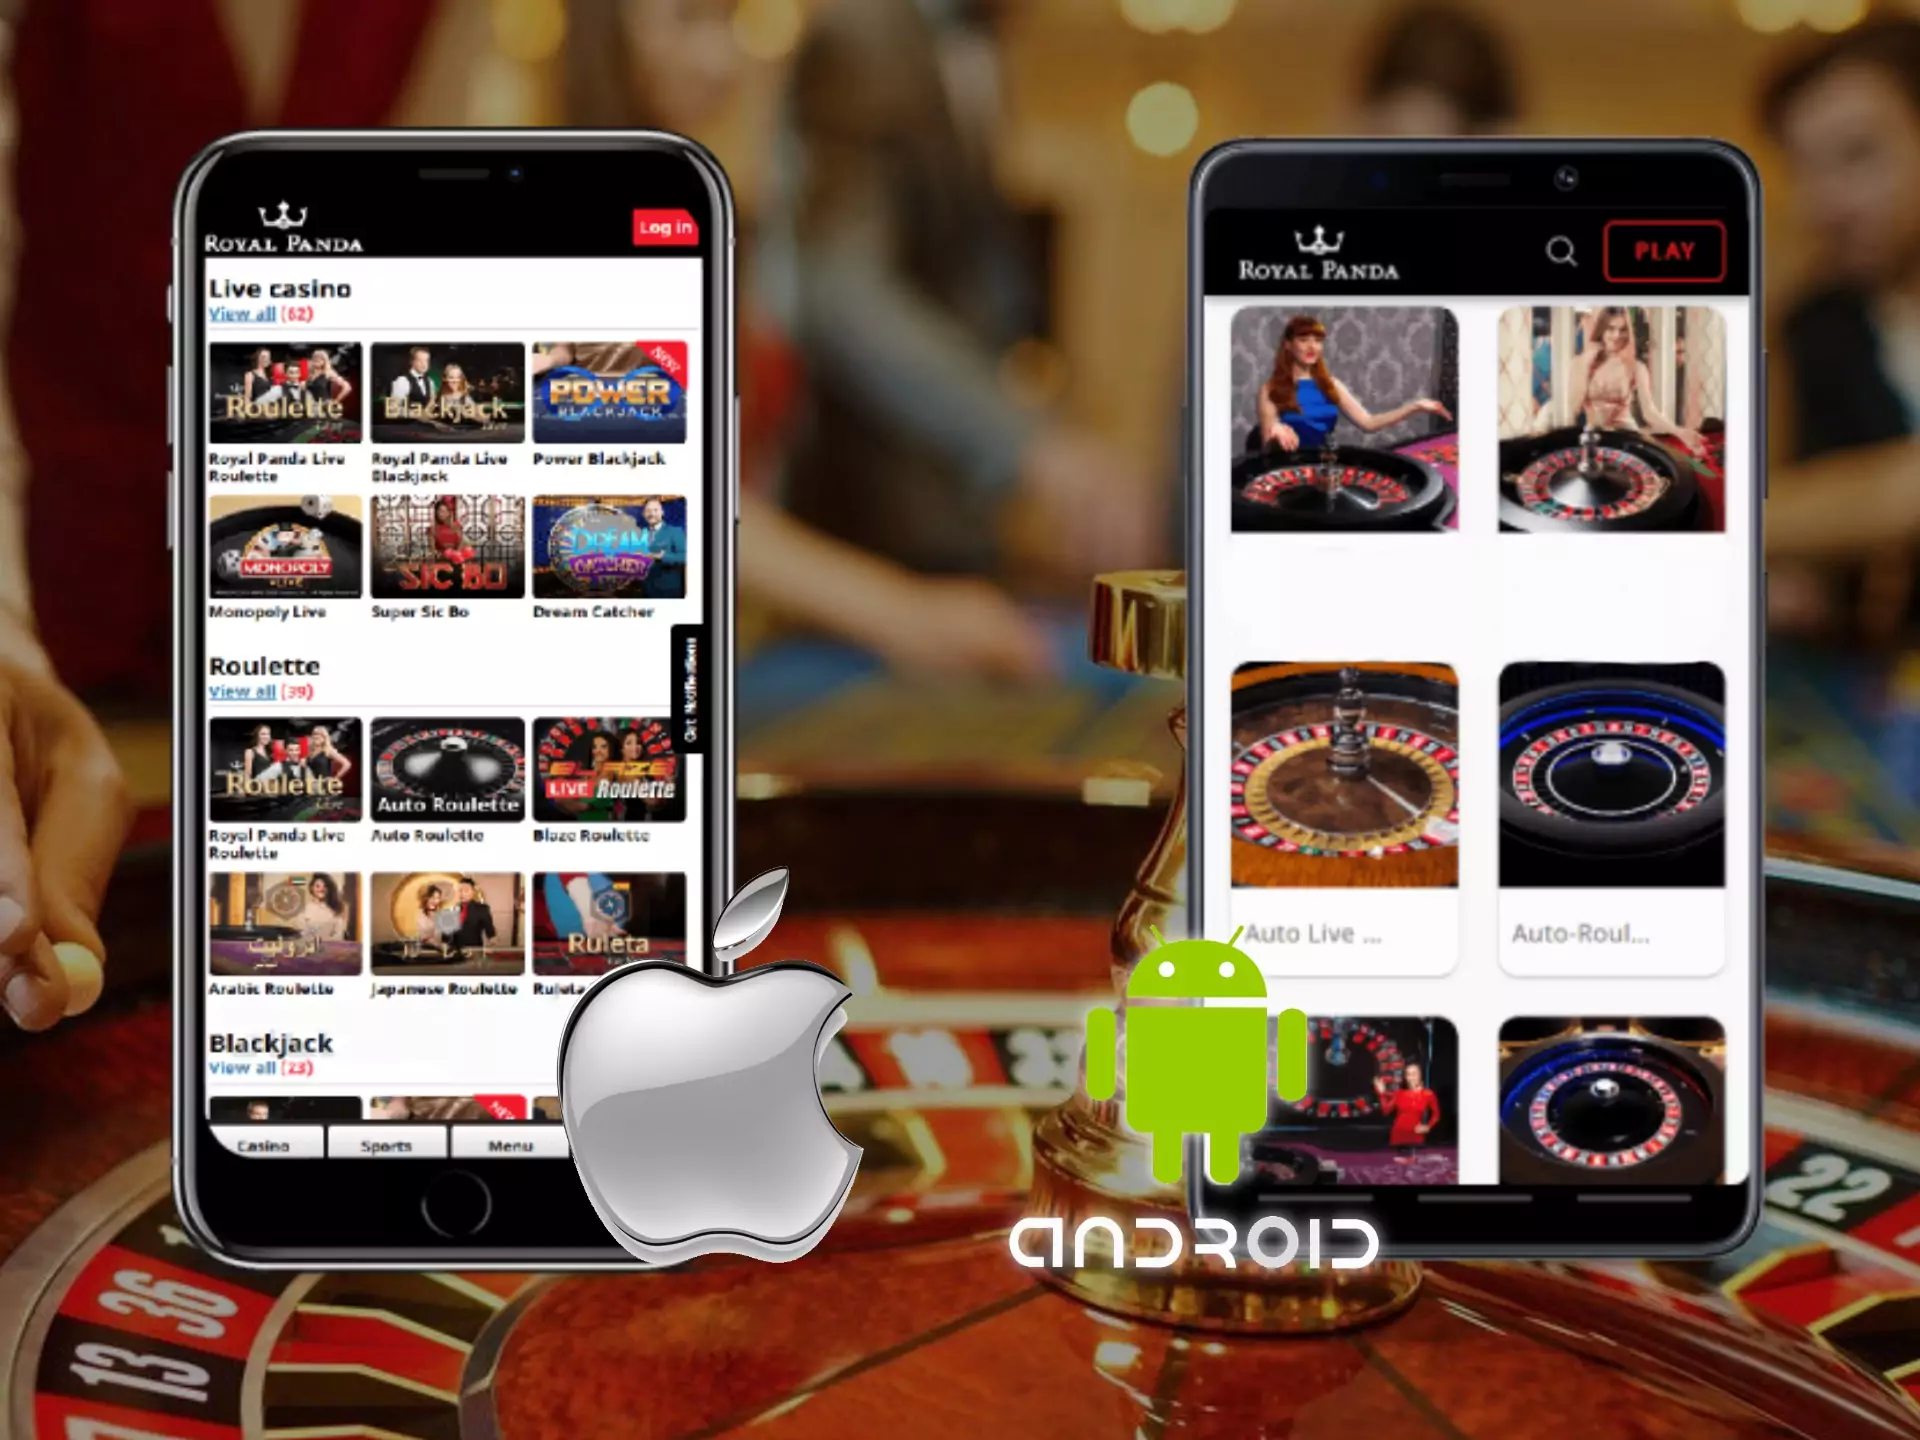 Play casino games with live dealers at Royla Panda casino.